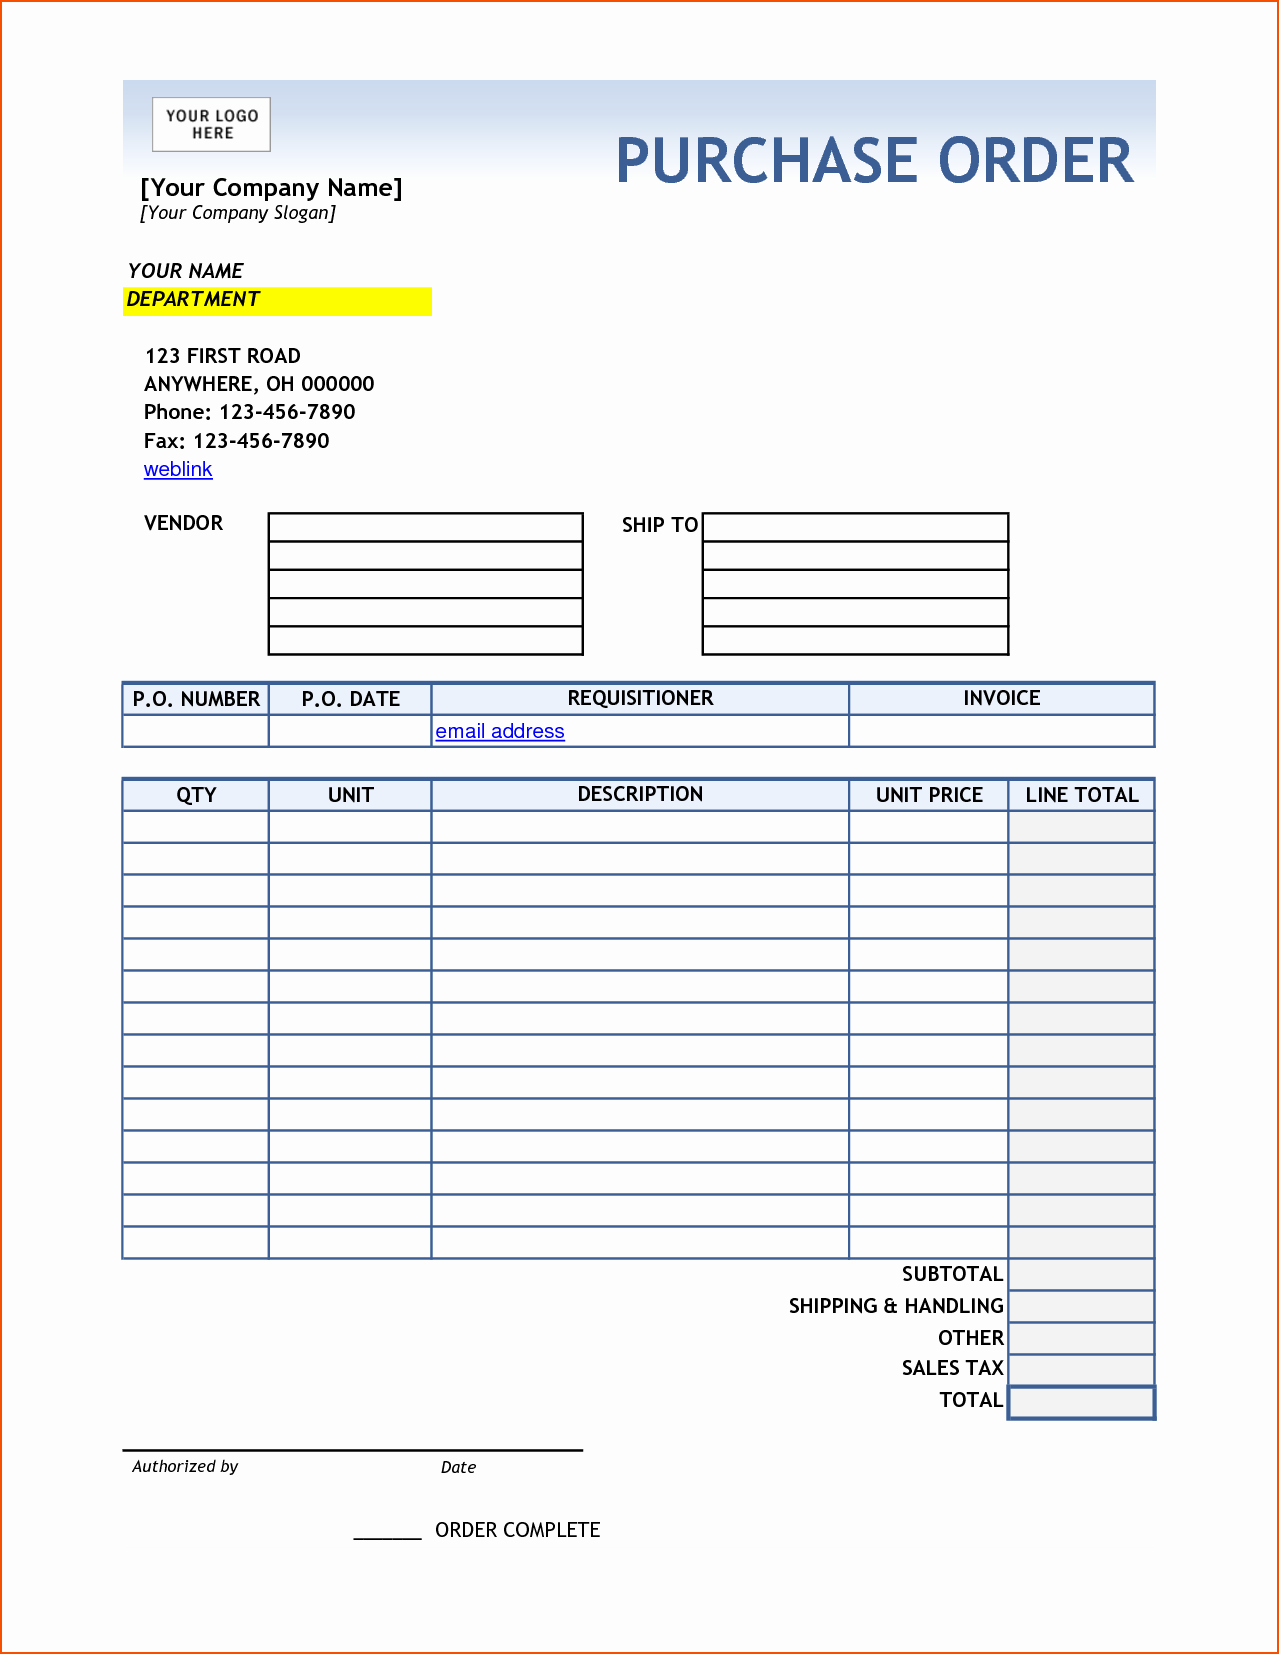 Purchase order Template Pdf Awesome Purchase order Template Pdf format In Word Daily Roabox